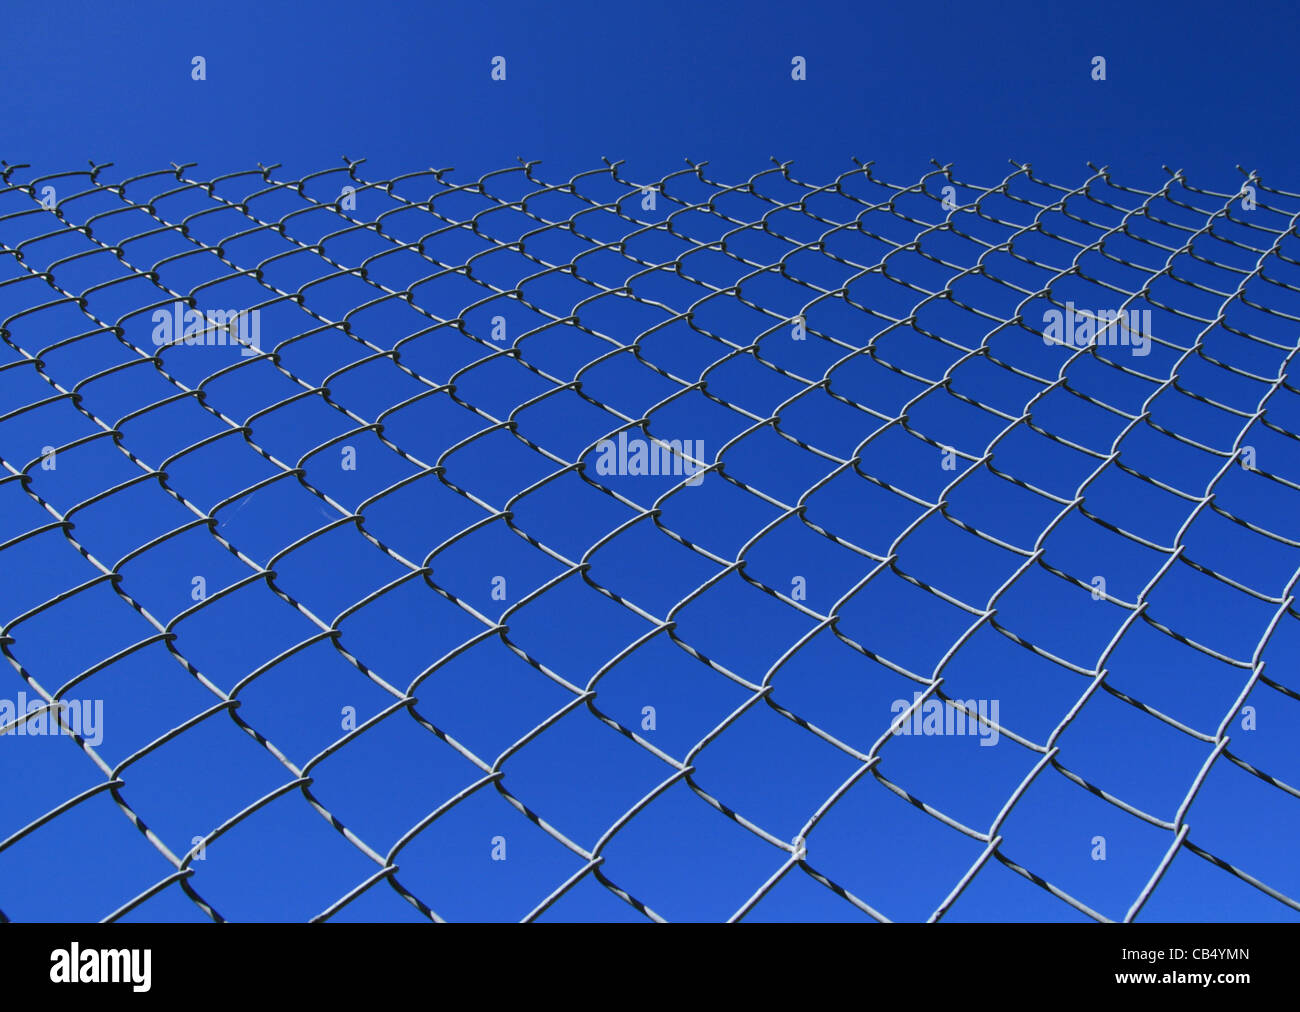 chain link fence against a blue sky Stock Photo